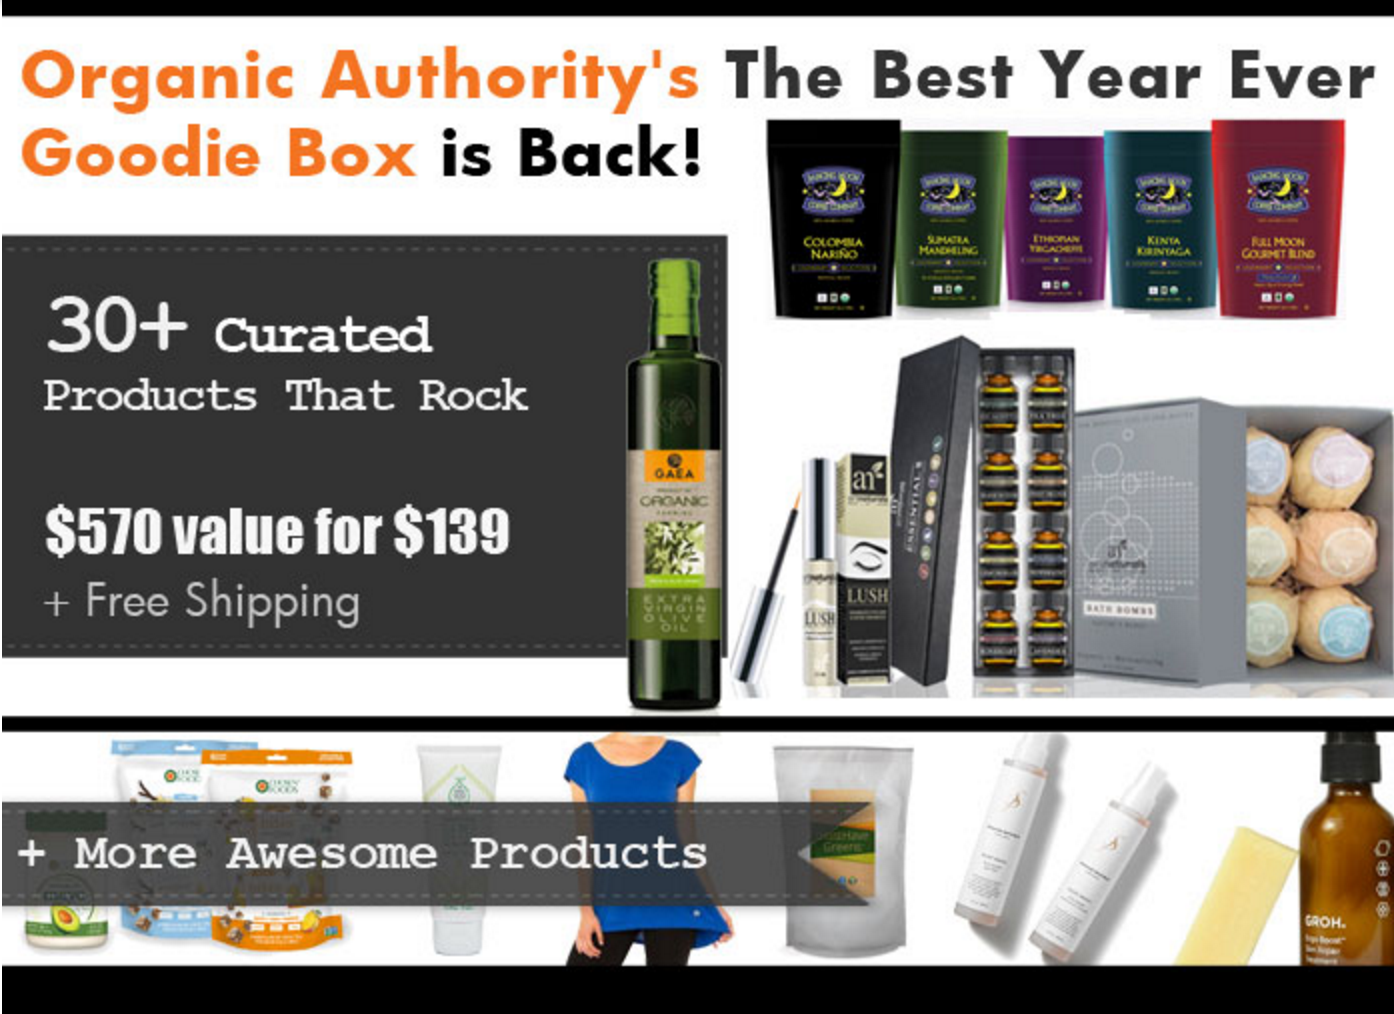 Organic Authority Best Year Ever Goodie Box On Sale Now!